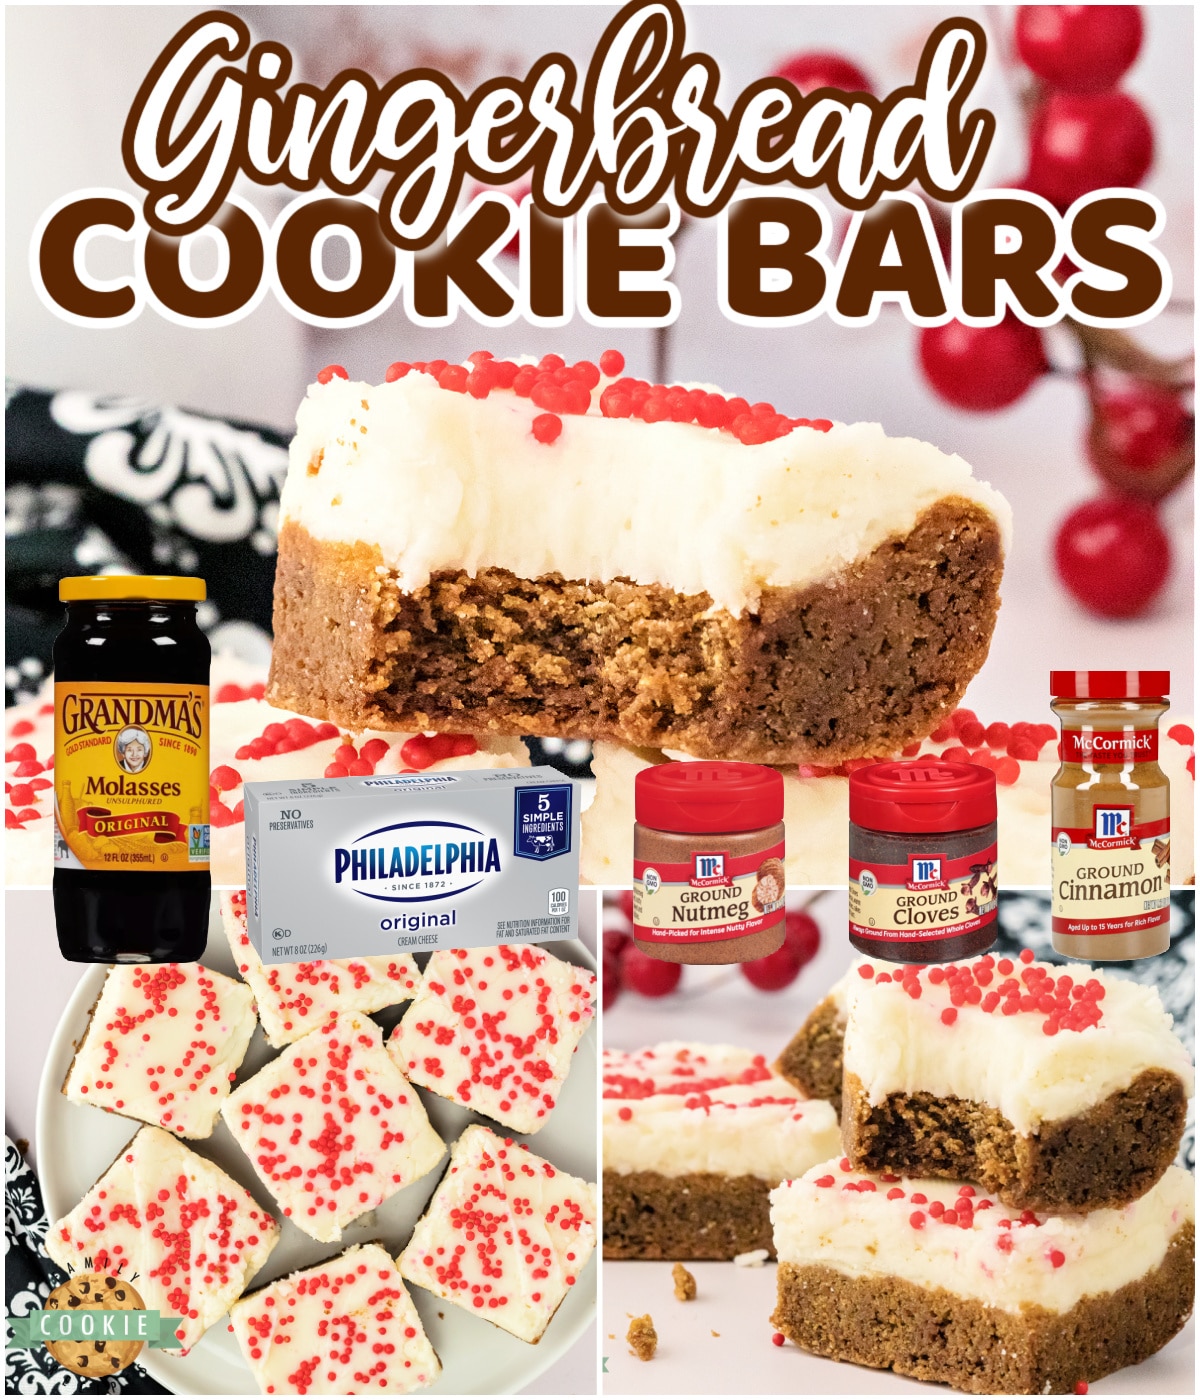 Gingerbread Cookie Bars are soft, thick, perfectly spiced and easy to make when you don't have time to scoop out individual cookies. Topped with cream cheese frosting, these gingerbread cookie bars are a big hit during the holiday season!  